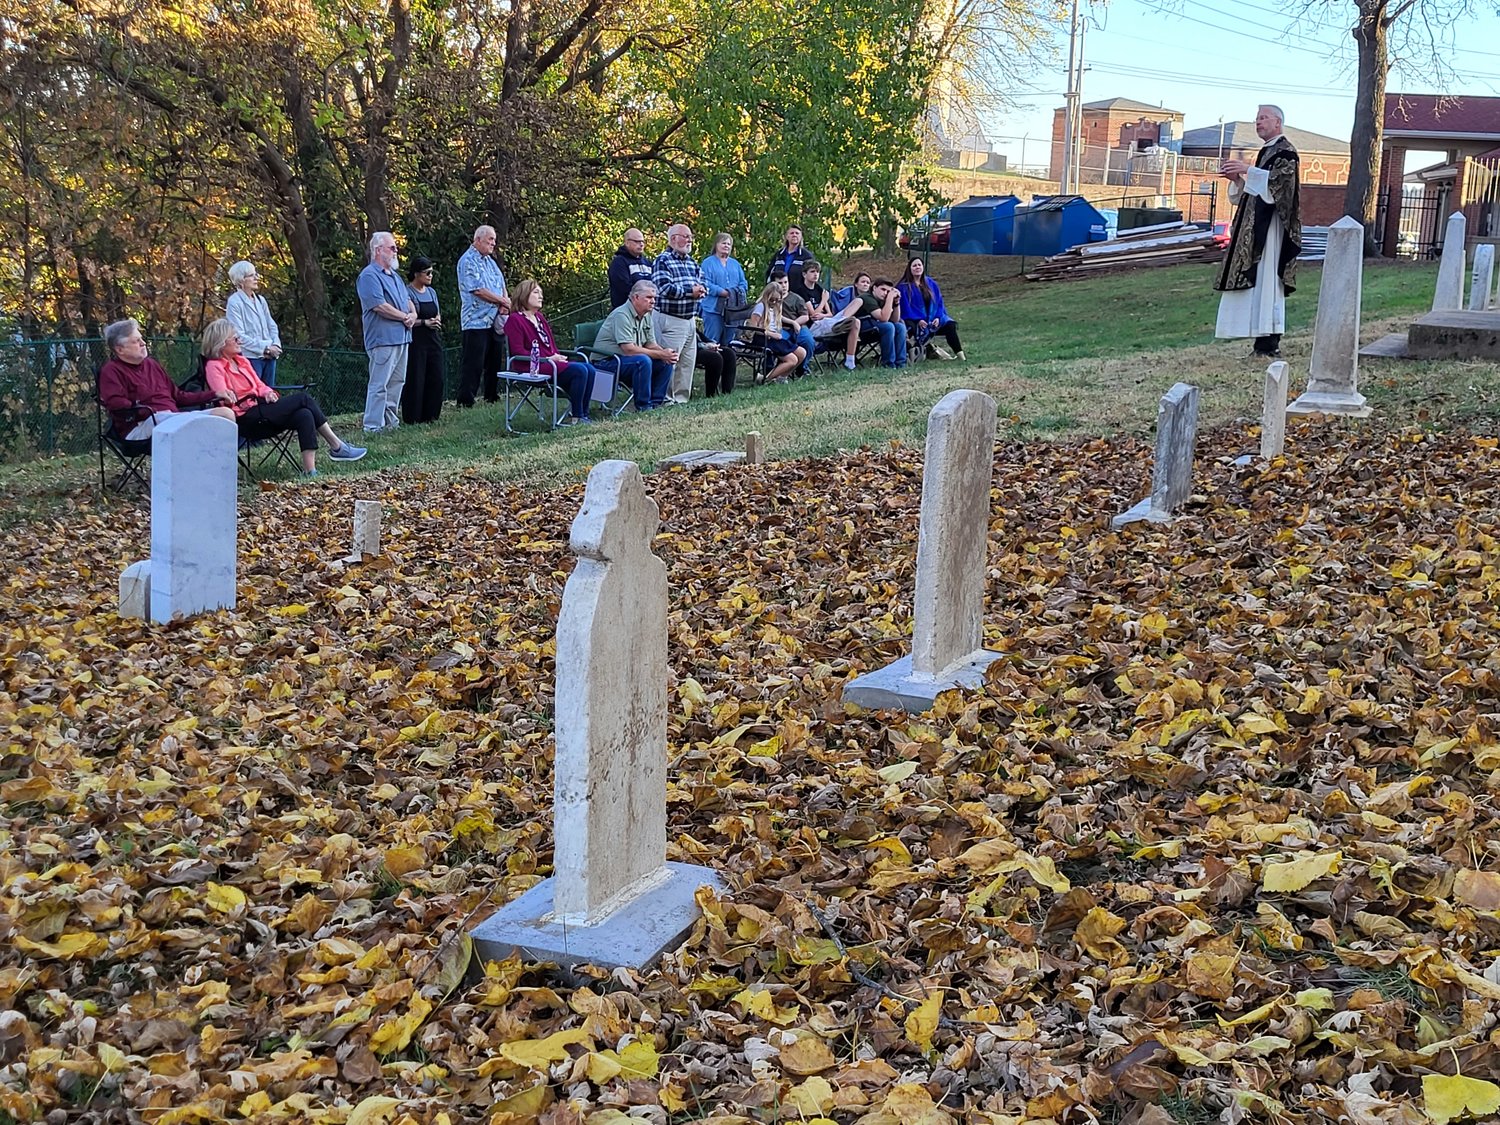 Father Jeremy Secrist, pastor of St. Peter Parish in Jefferson City, offers Mass in the recently restored St. Peter Cemetery 1, in which burials took place from the 1840s until about 1880, on All Souls Day.